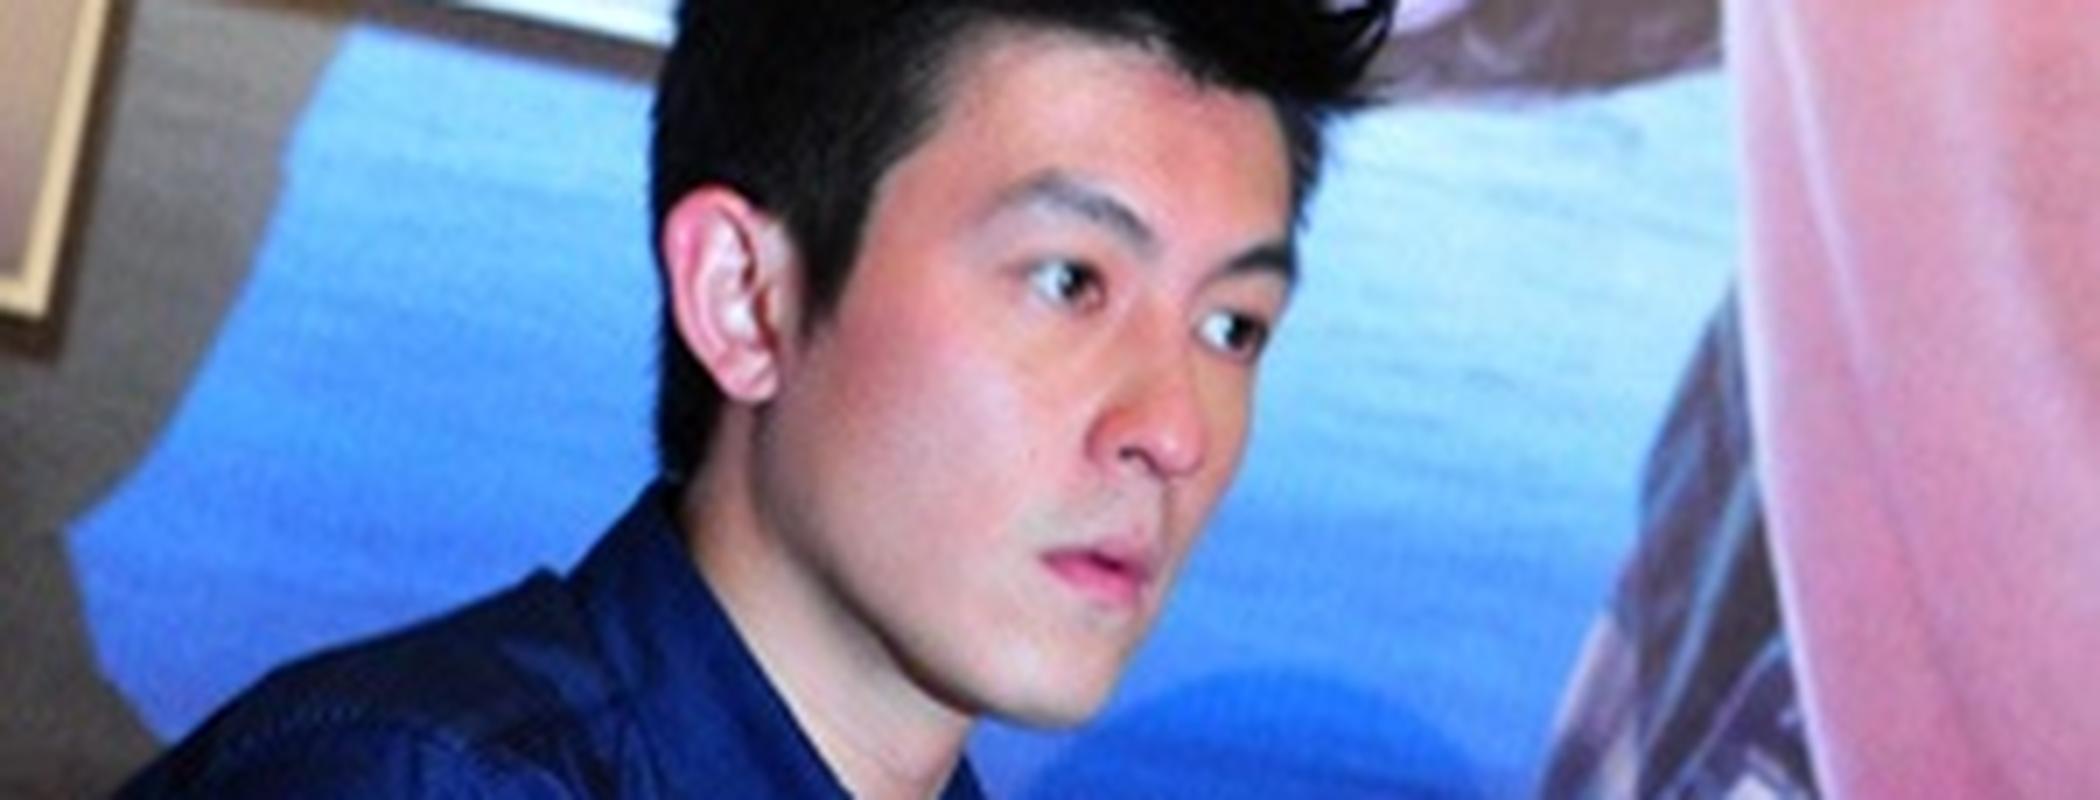 Edison Chen in 1st Movie Since Sex Photo Scandal